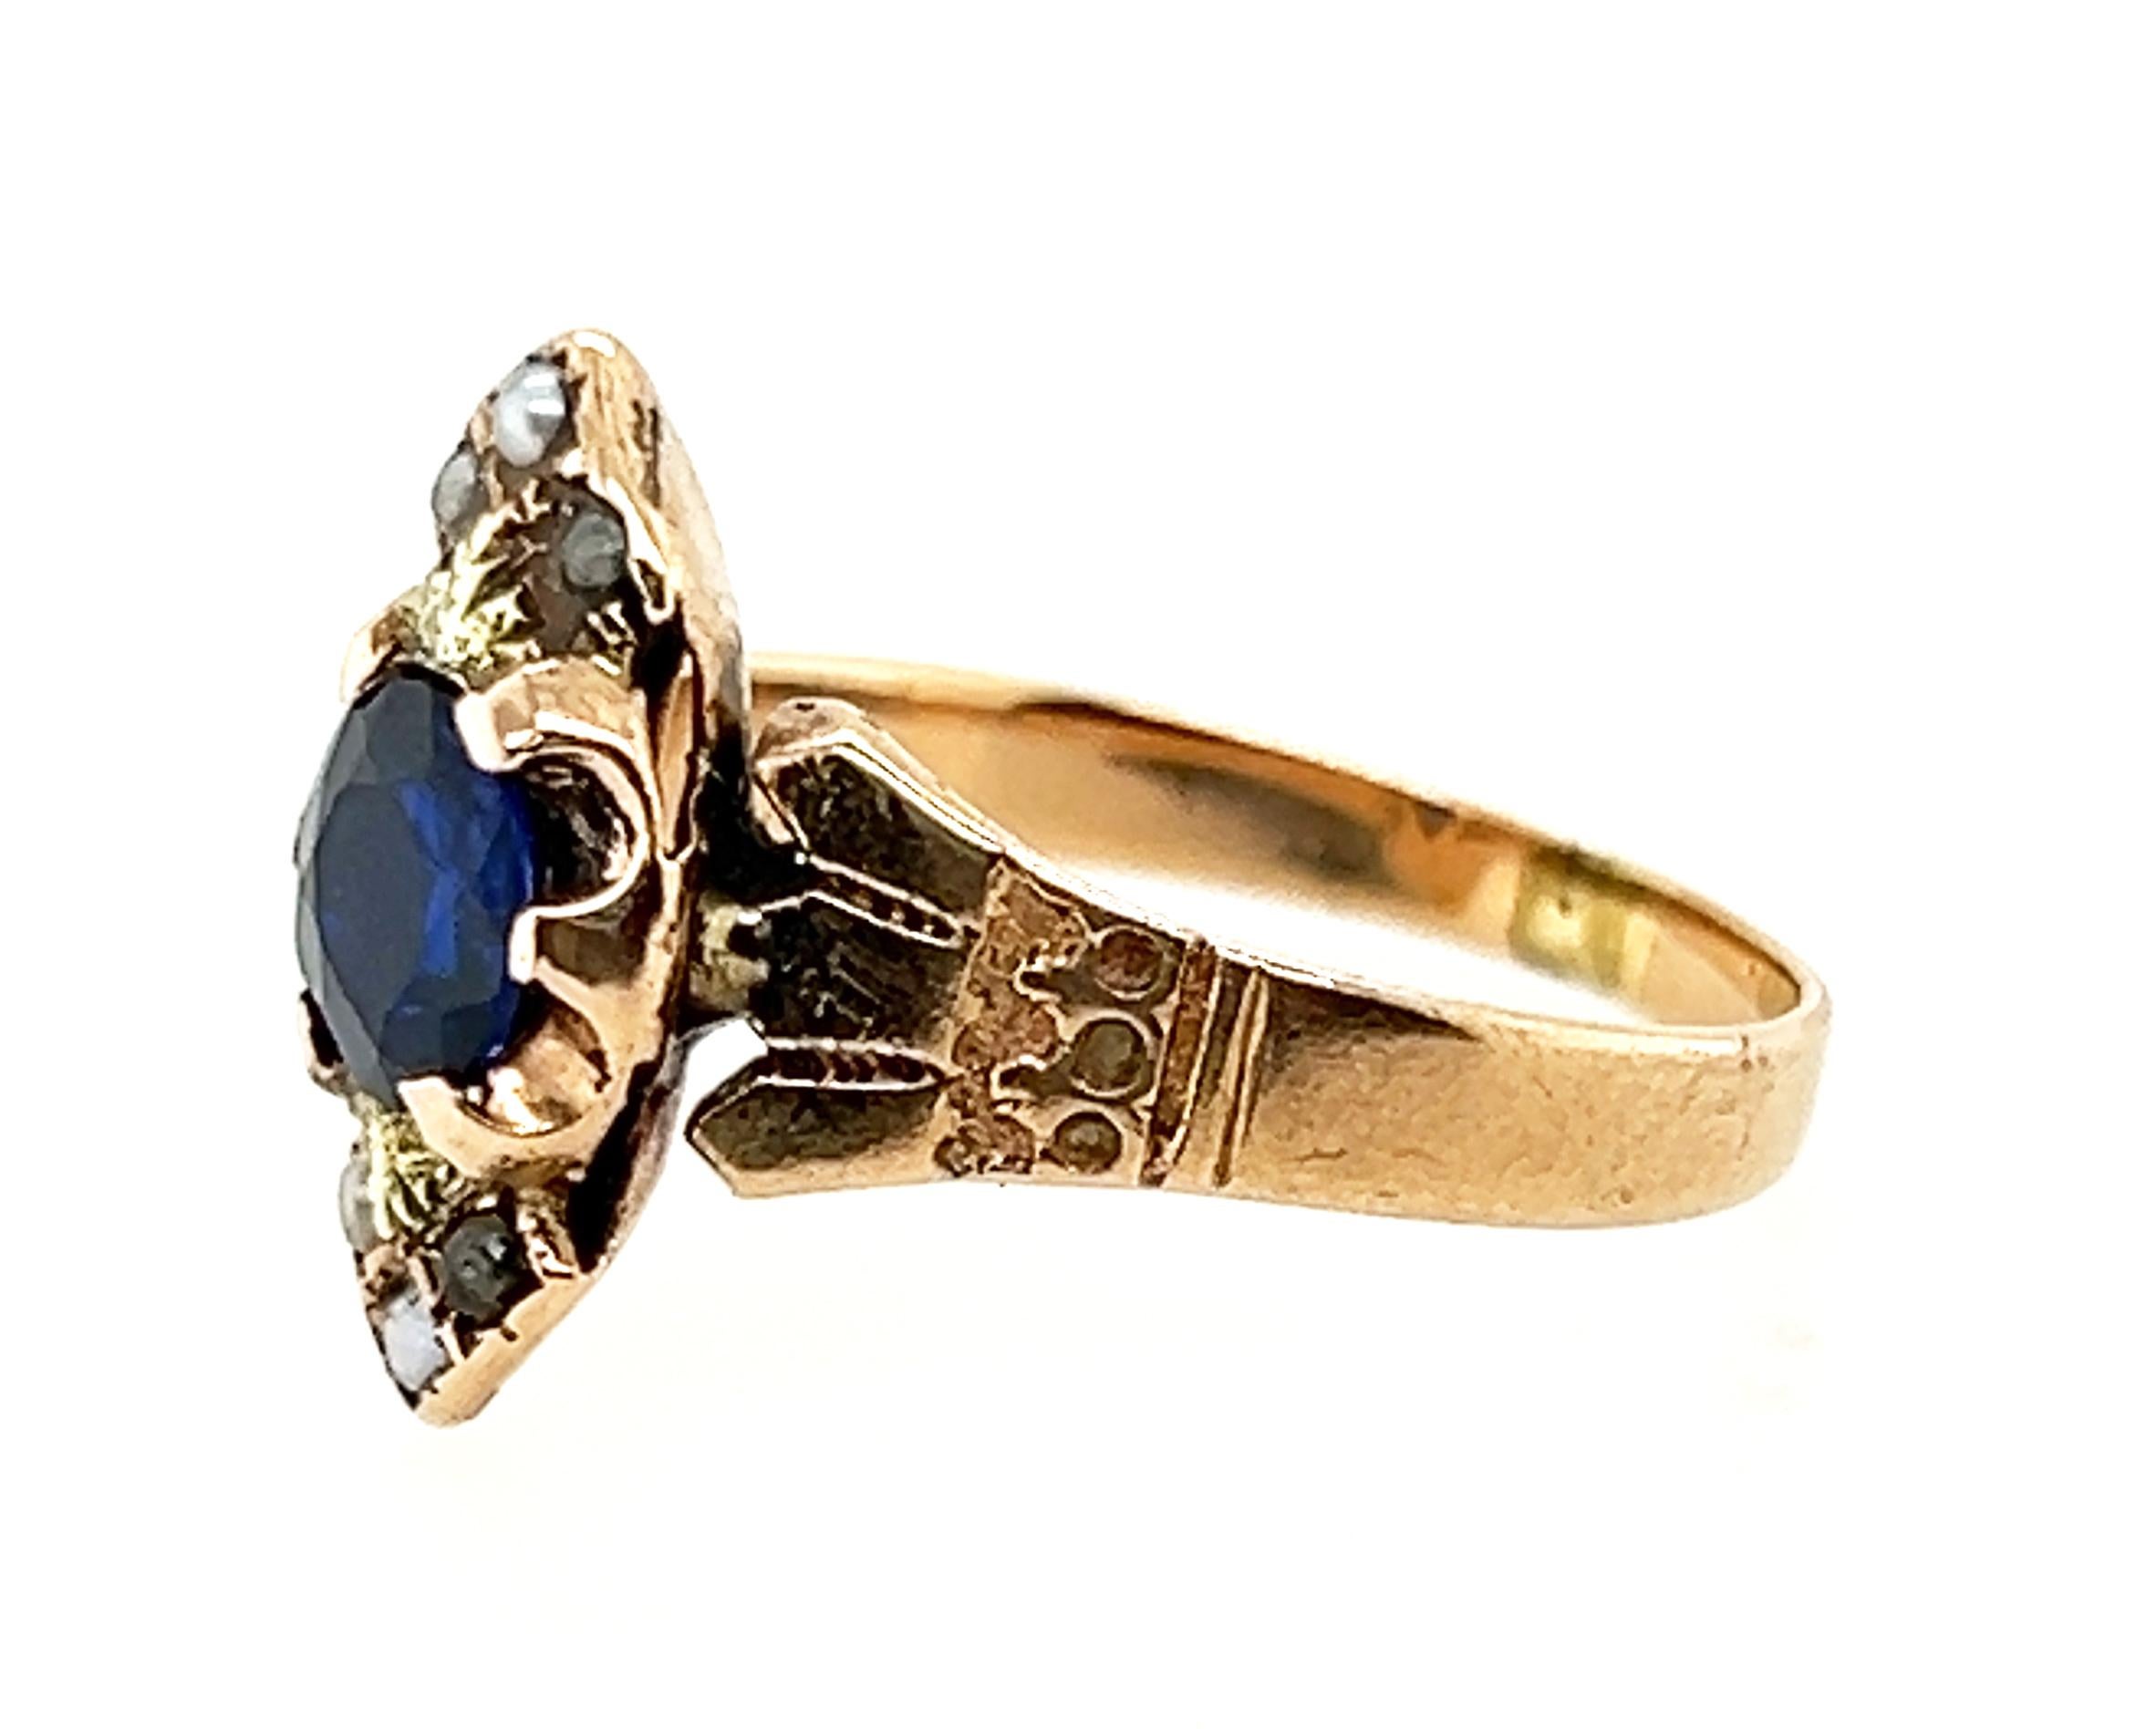 Round Cut Victorian Sapphire Ring .70ct Seed Pearls Original 1860's-1880's Antique 14K